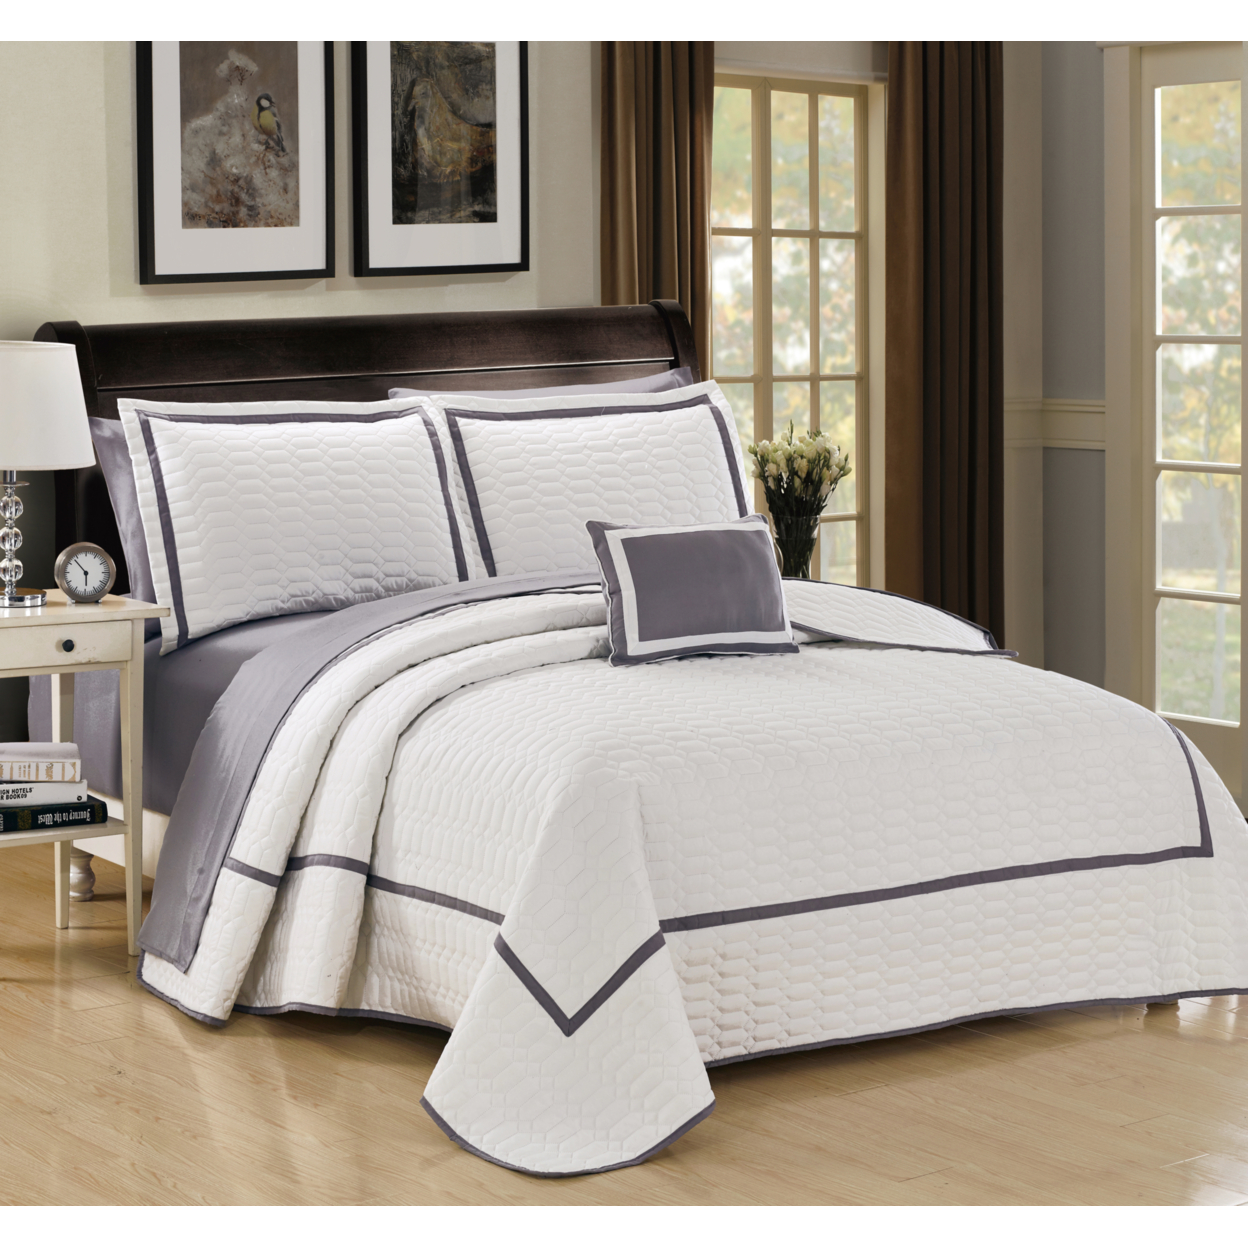 8 Pc. Neal Hotel Collection 2 Tone Banded Geometrical Embroidered, Quilt In A Bag, Includes Sheets Set, Shams & Decorative Pillows - White,